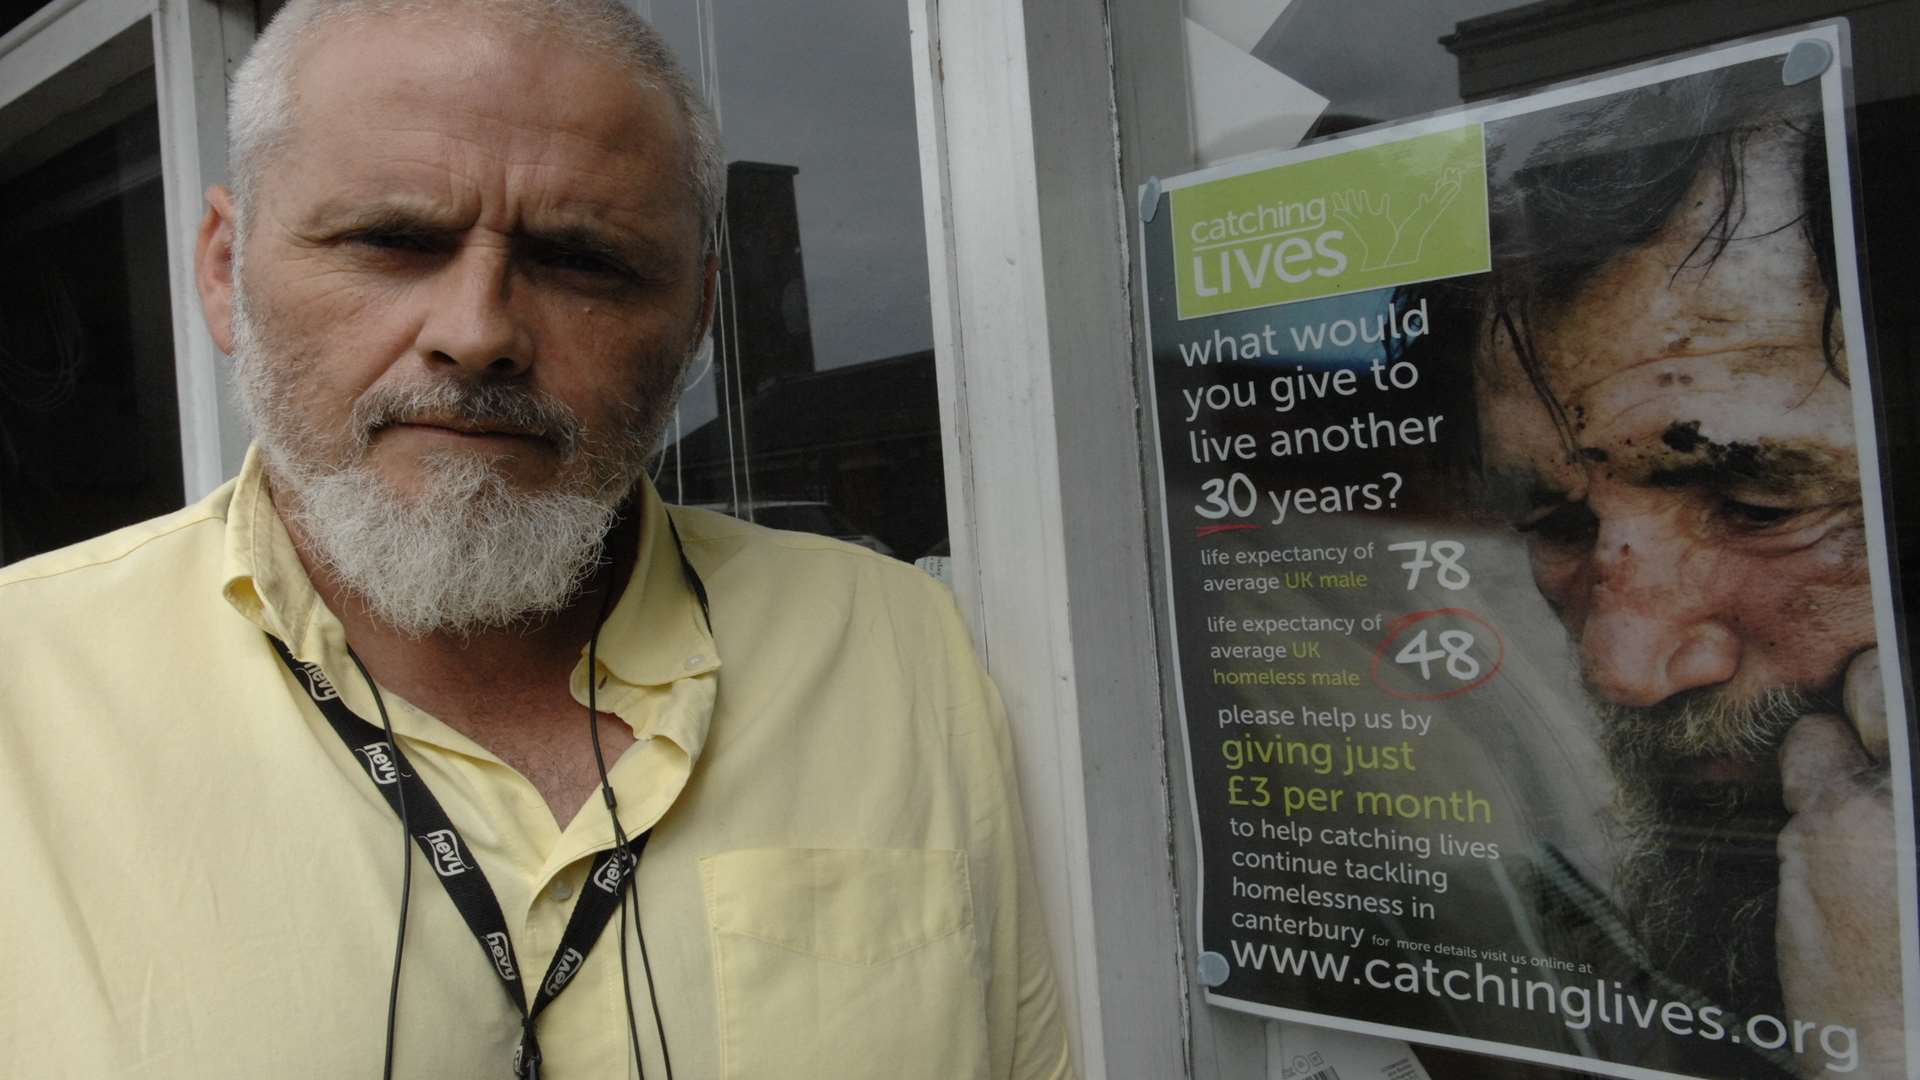 Terry Gore manages the Catching Lives Day Centre